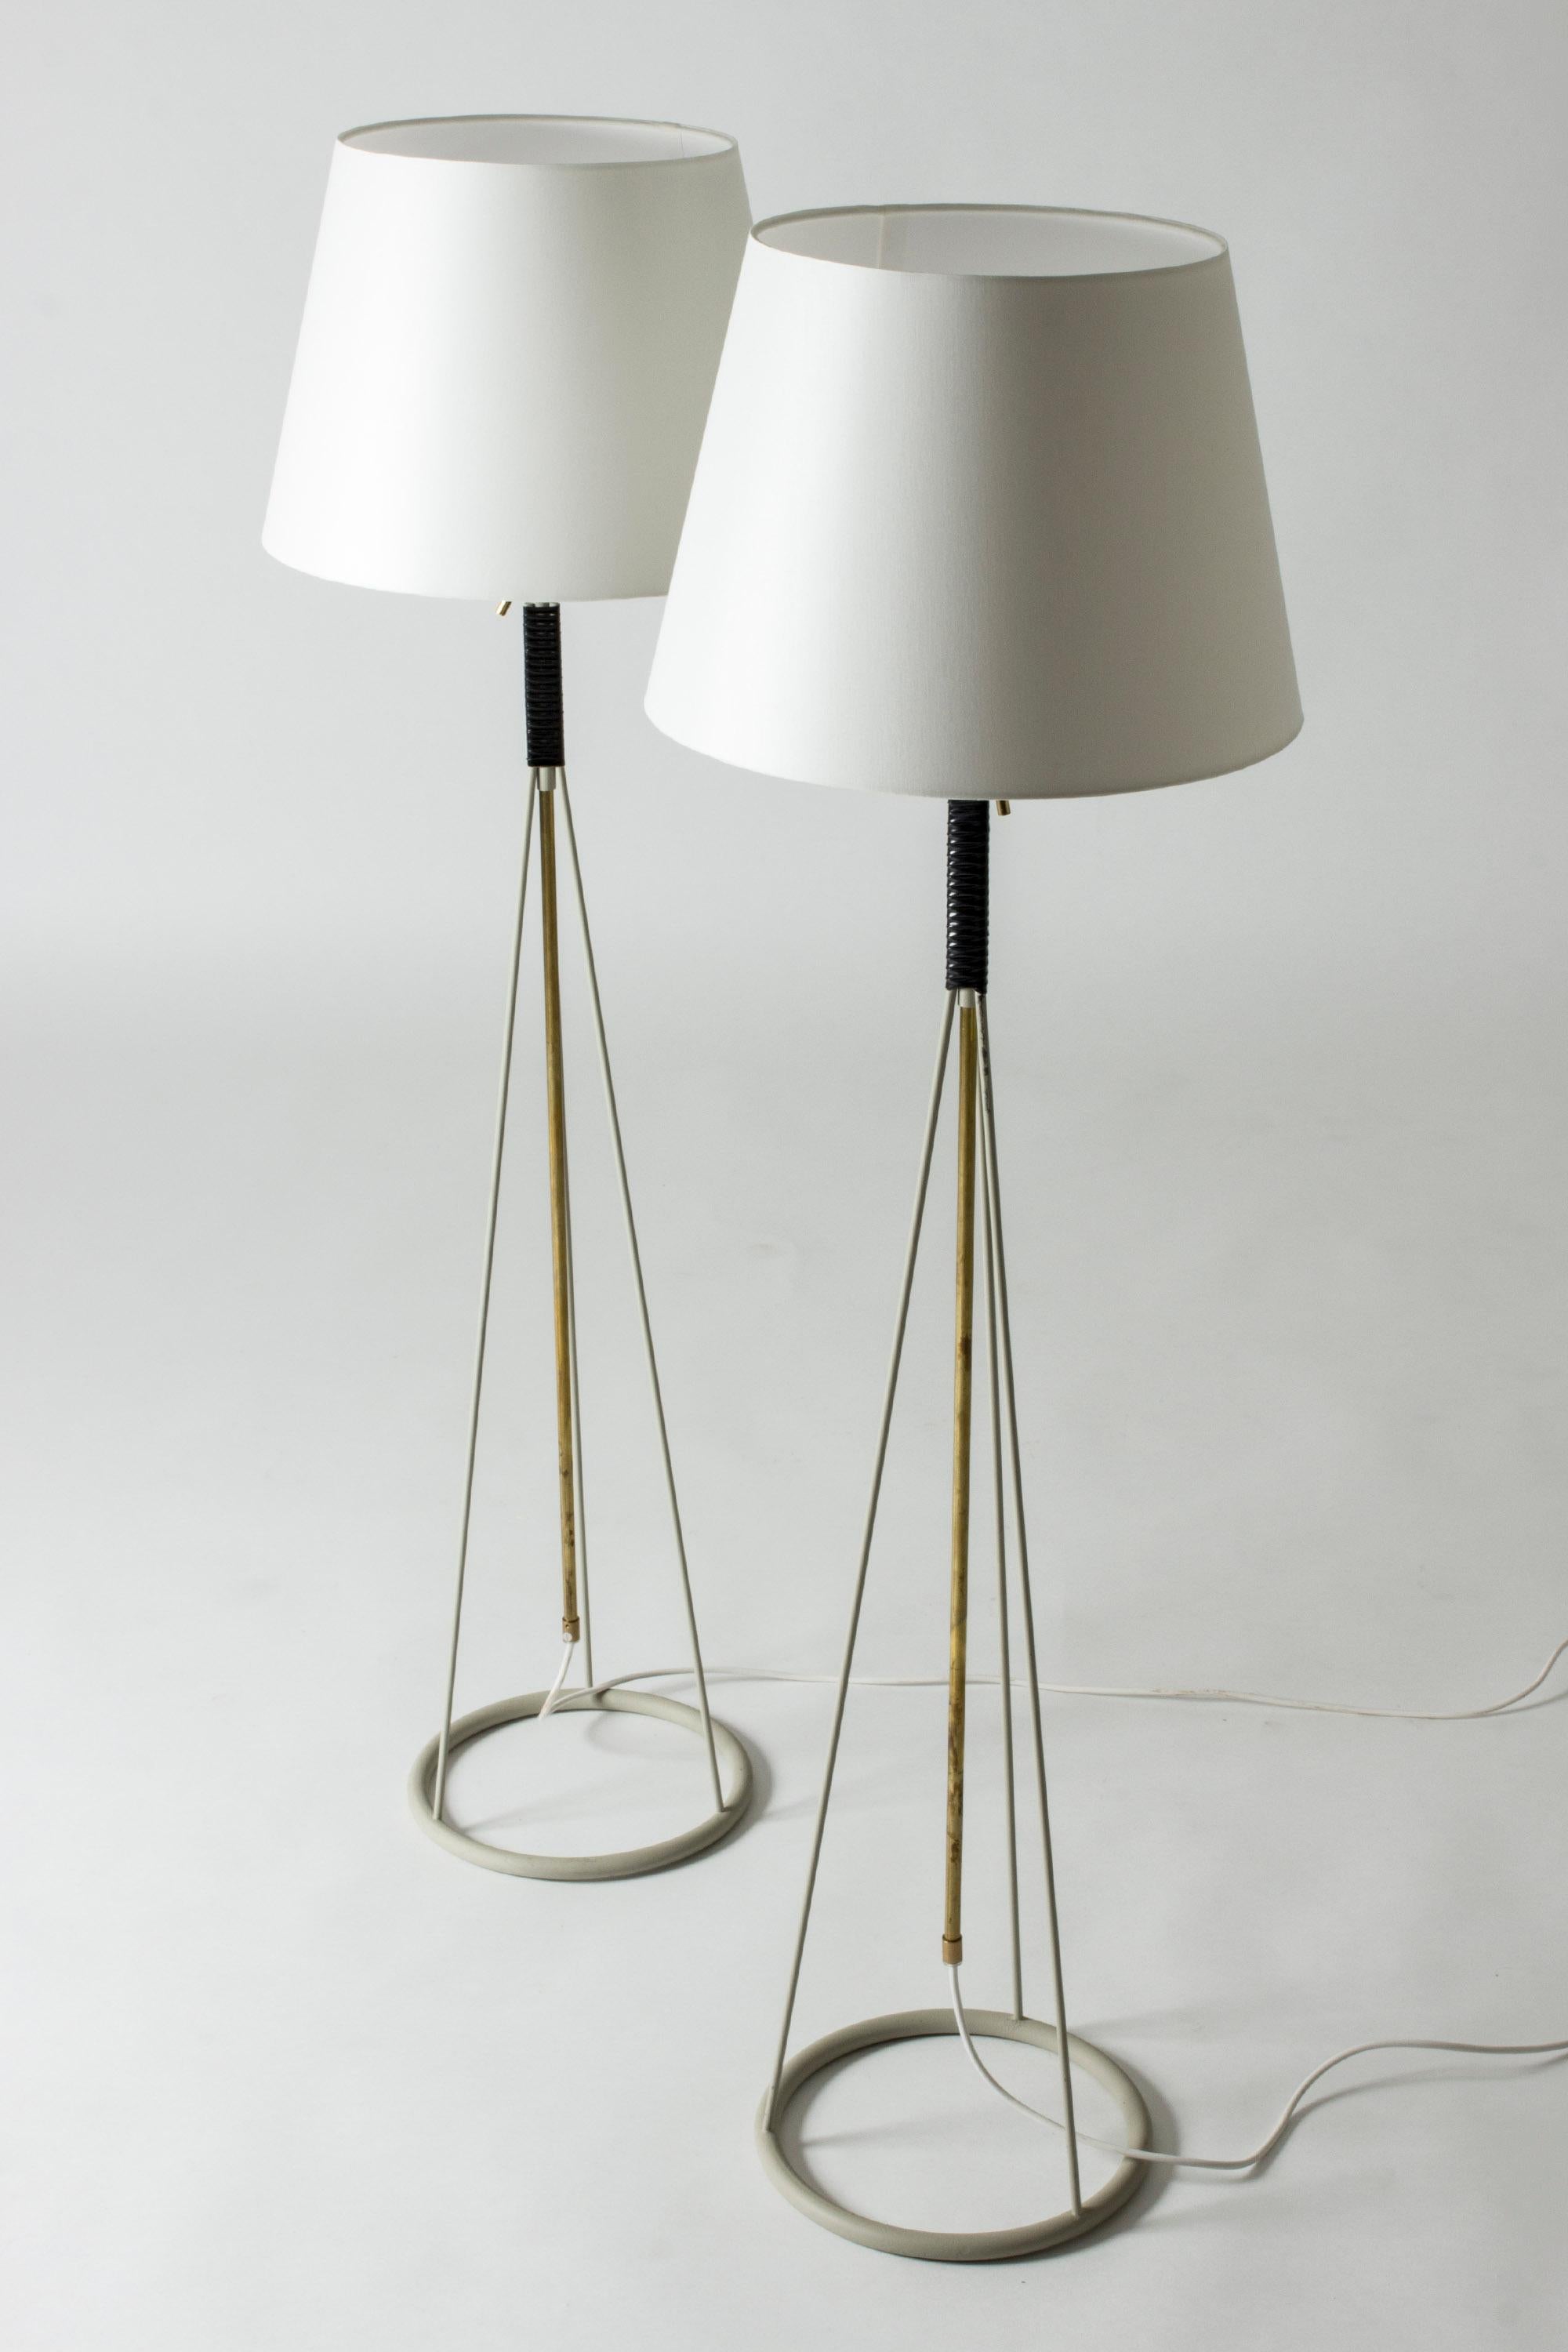 Swedish Pair of Floor Lamps from Luco, Sweden, 1950s